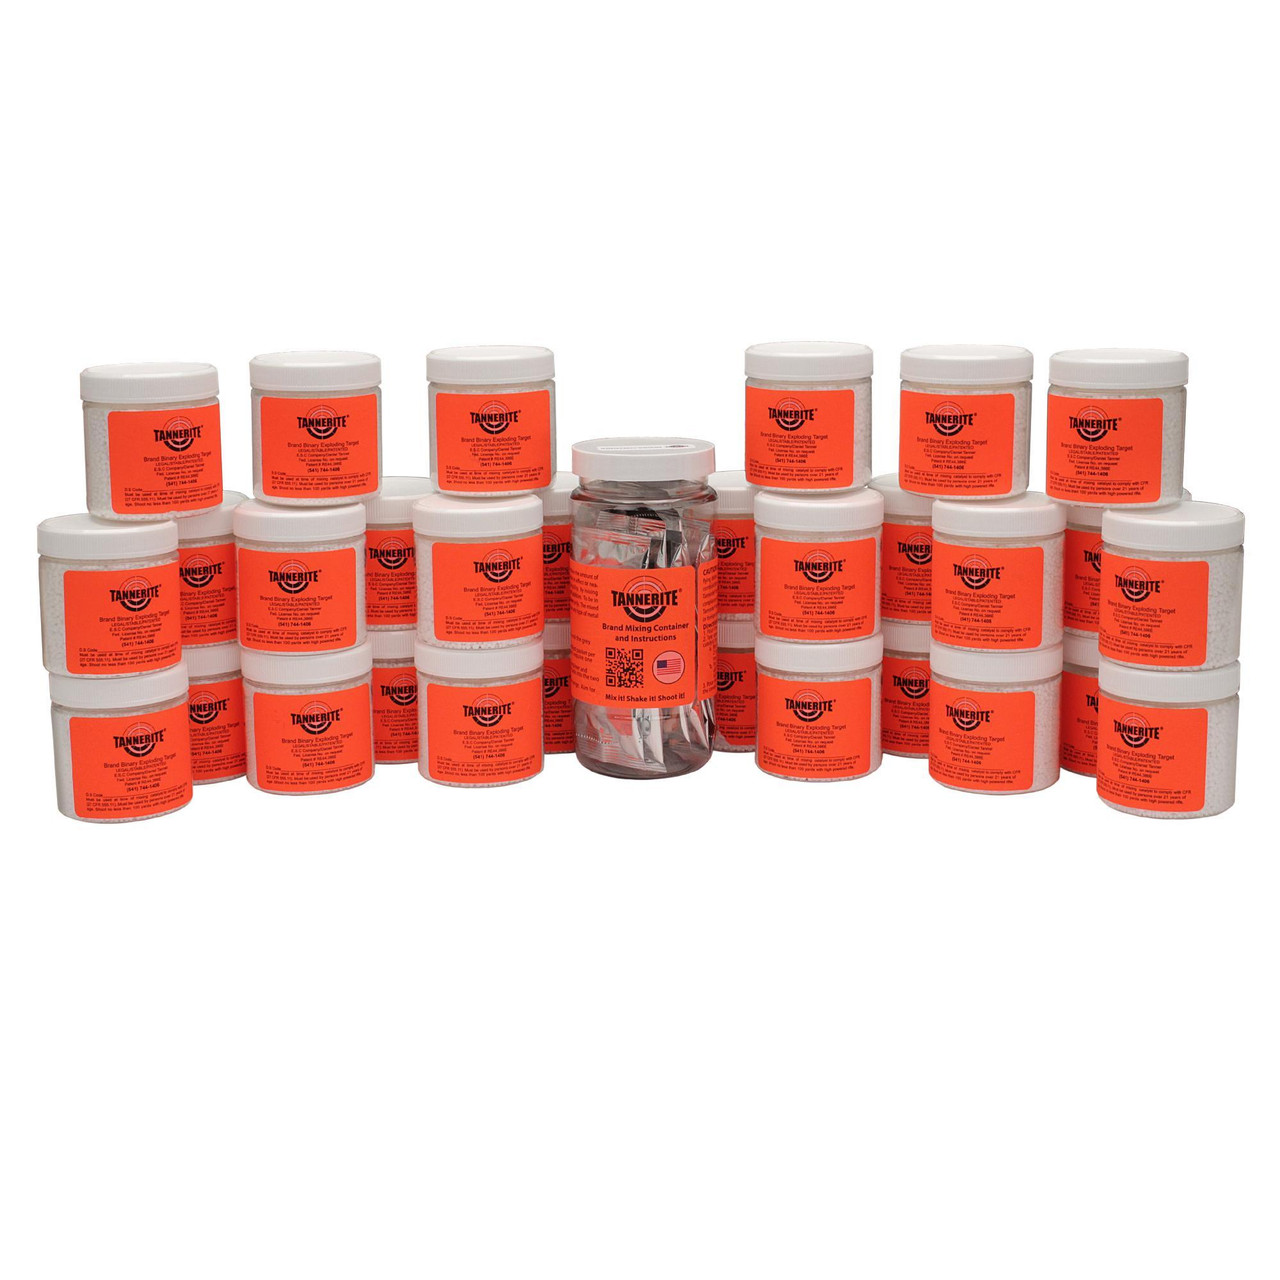 Tannerite Single 1 lb Exploding Target - Nexgen Outfitters